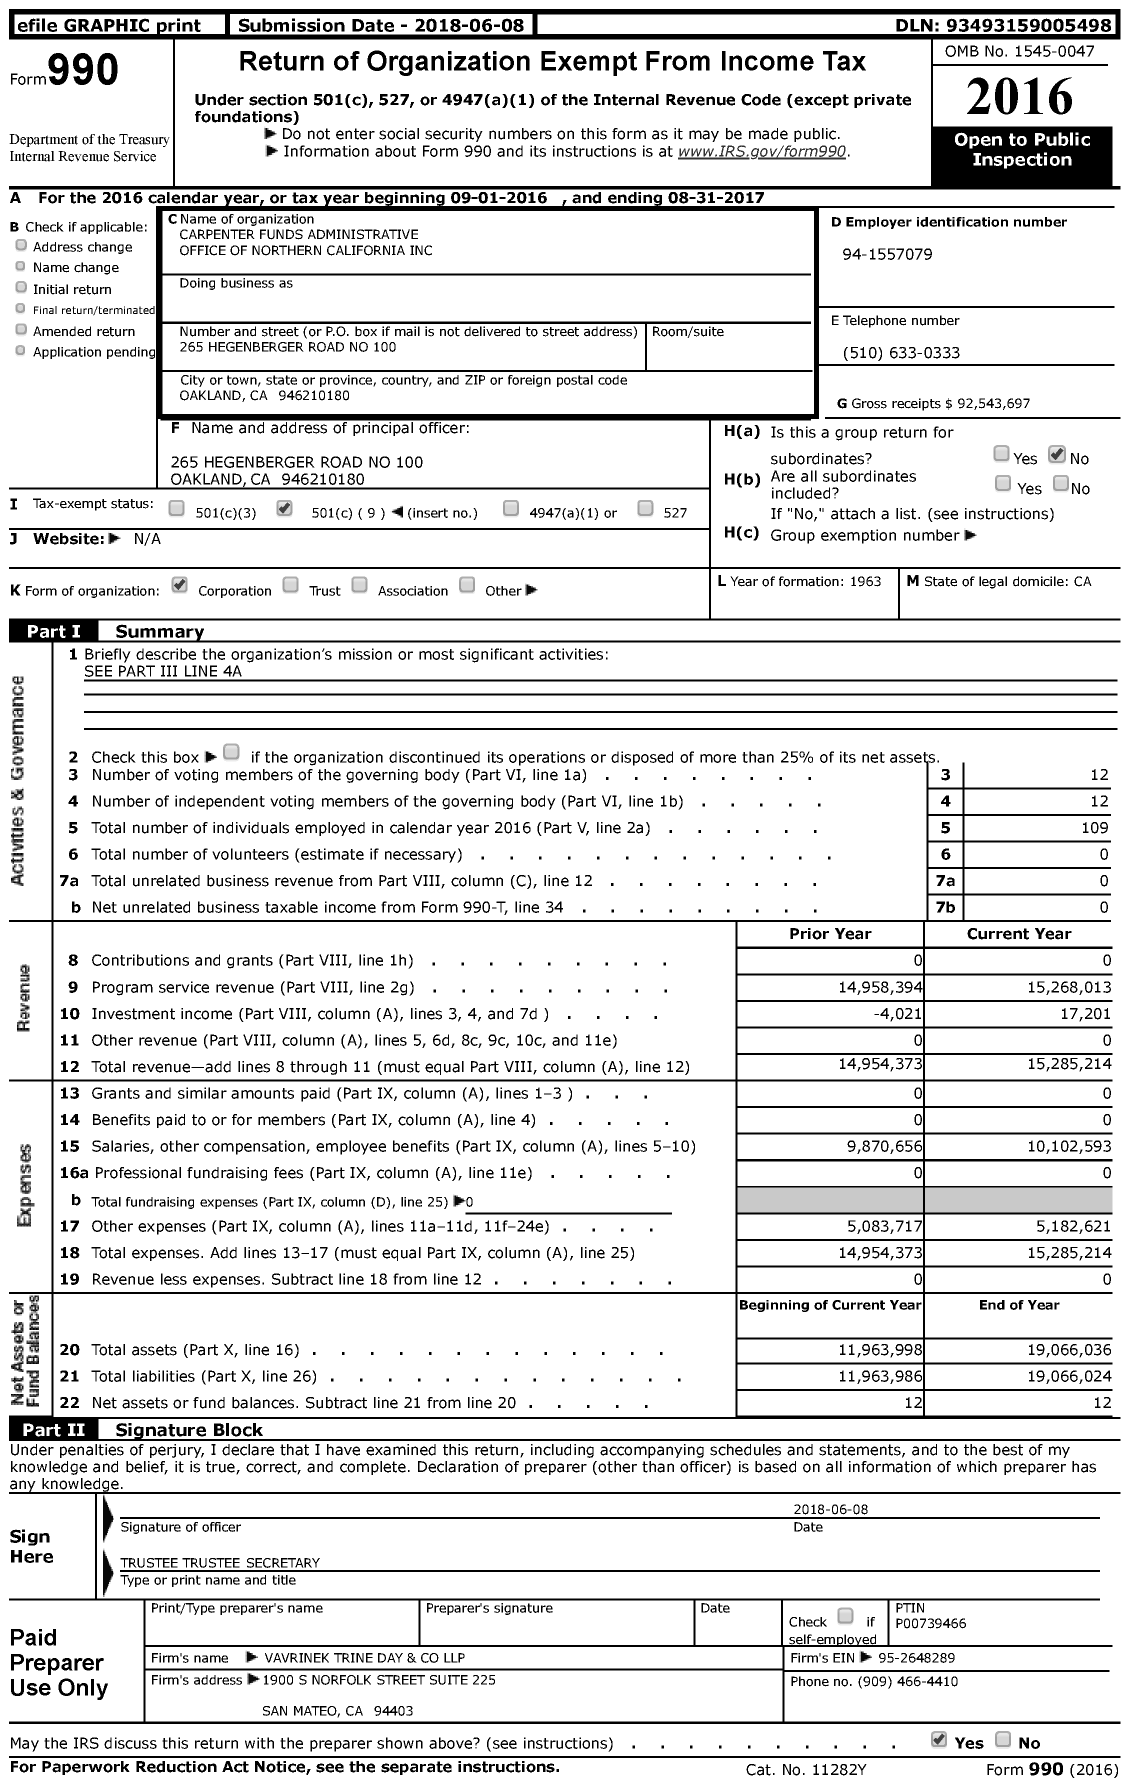 Image of first page of 2016 Form 990 for Carpenters Funds Administrative Office of Northern California